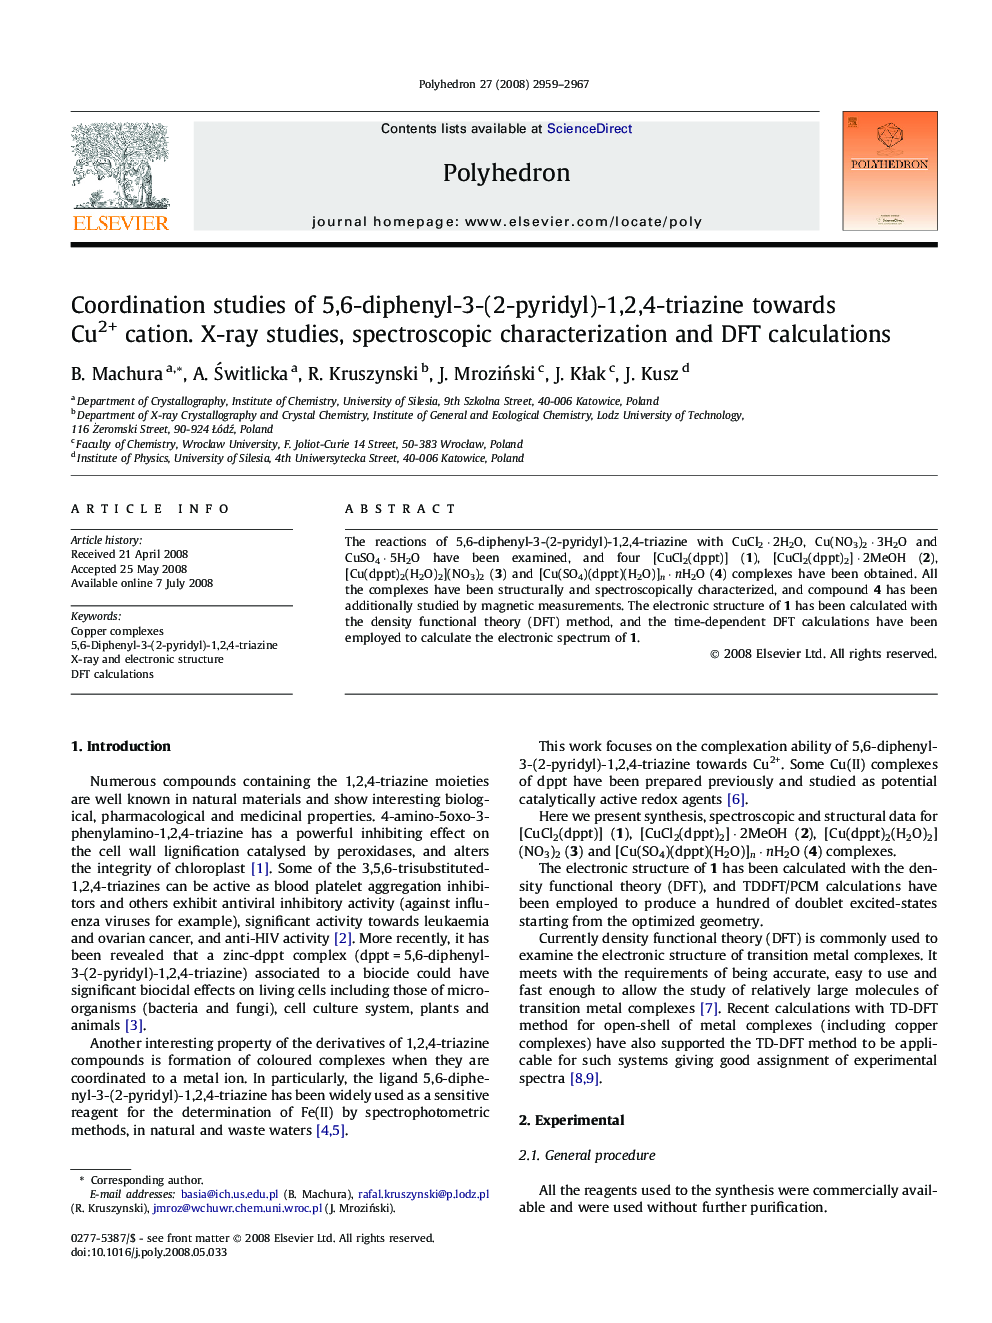 Coordination studies of 5,6-diphenyl-3-(2-pyridyl)-1,2,4-triazine towards Cu2+ cation. X-ray studies, spectroscopic characterization and DFT calculations